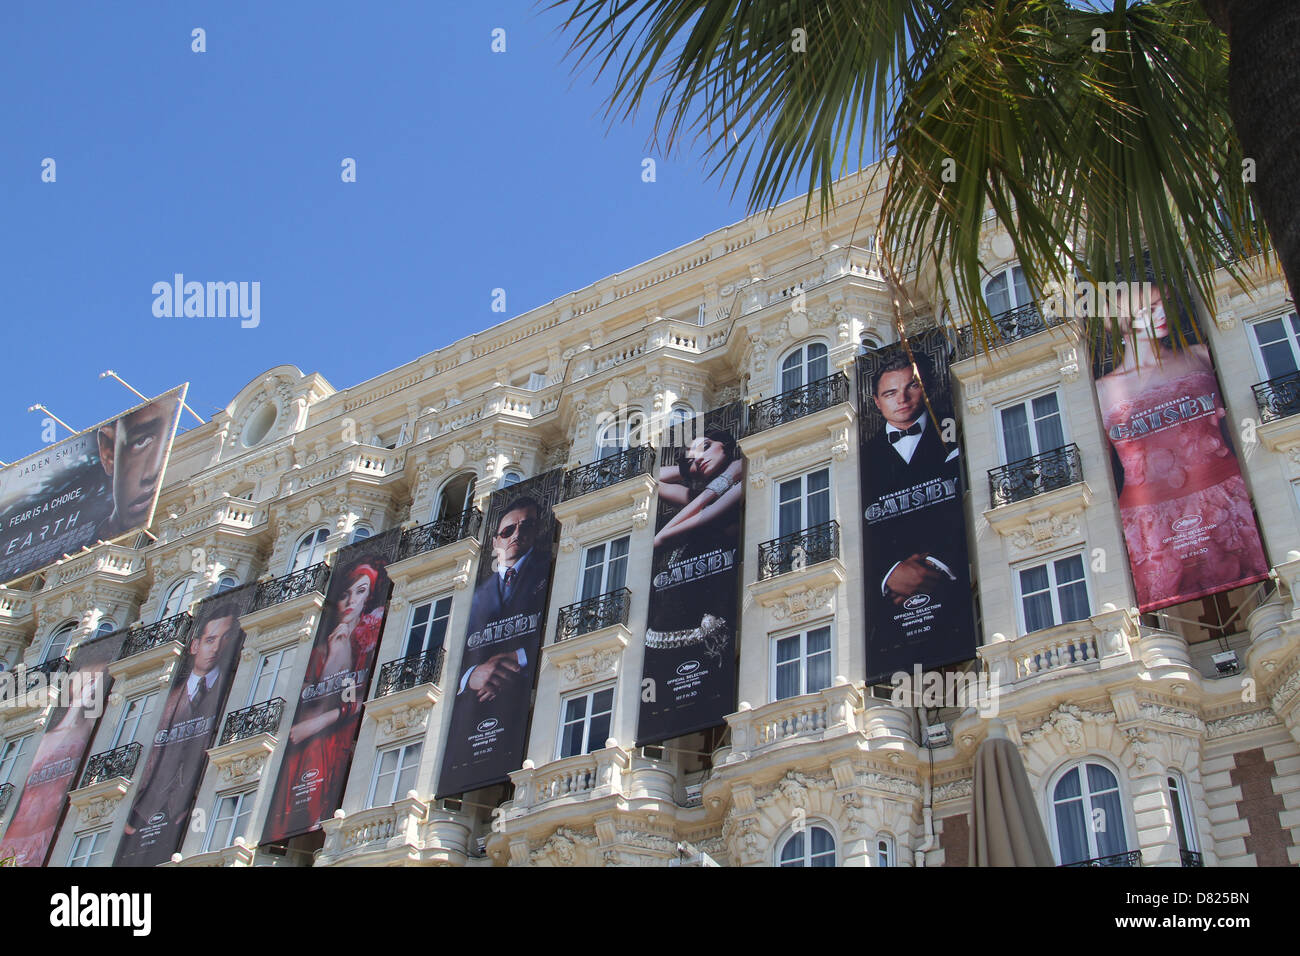 THE GREAT GATSBY MOVIE POSTERS THE GREAT GATSBY FILM POSTERS. CANNES FILM FESTIVAL 2013 CANNES  FRANCE 17 May 2013 Stock Photo